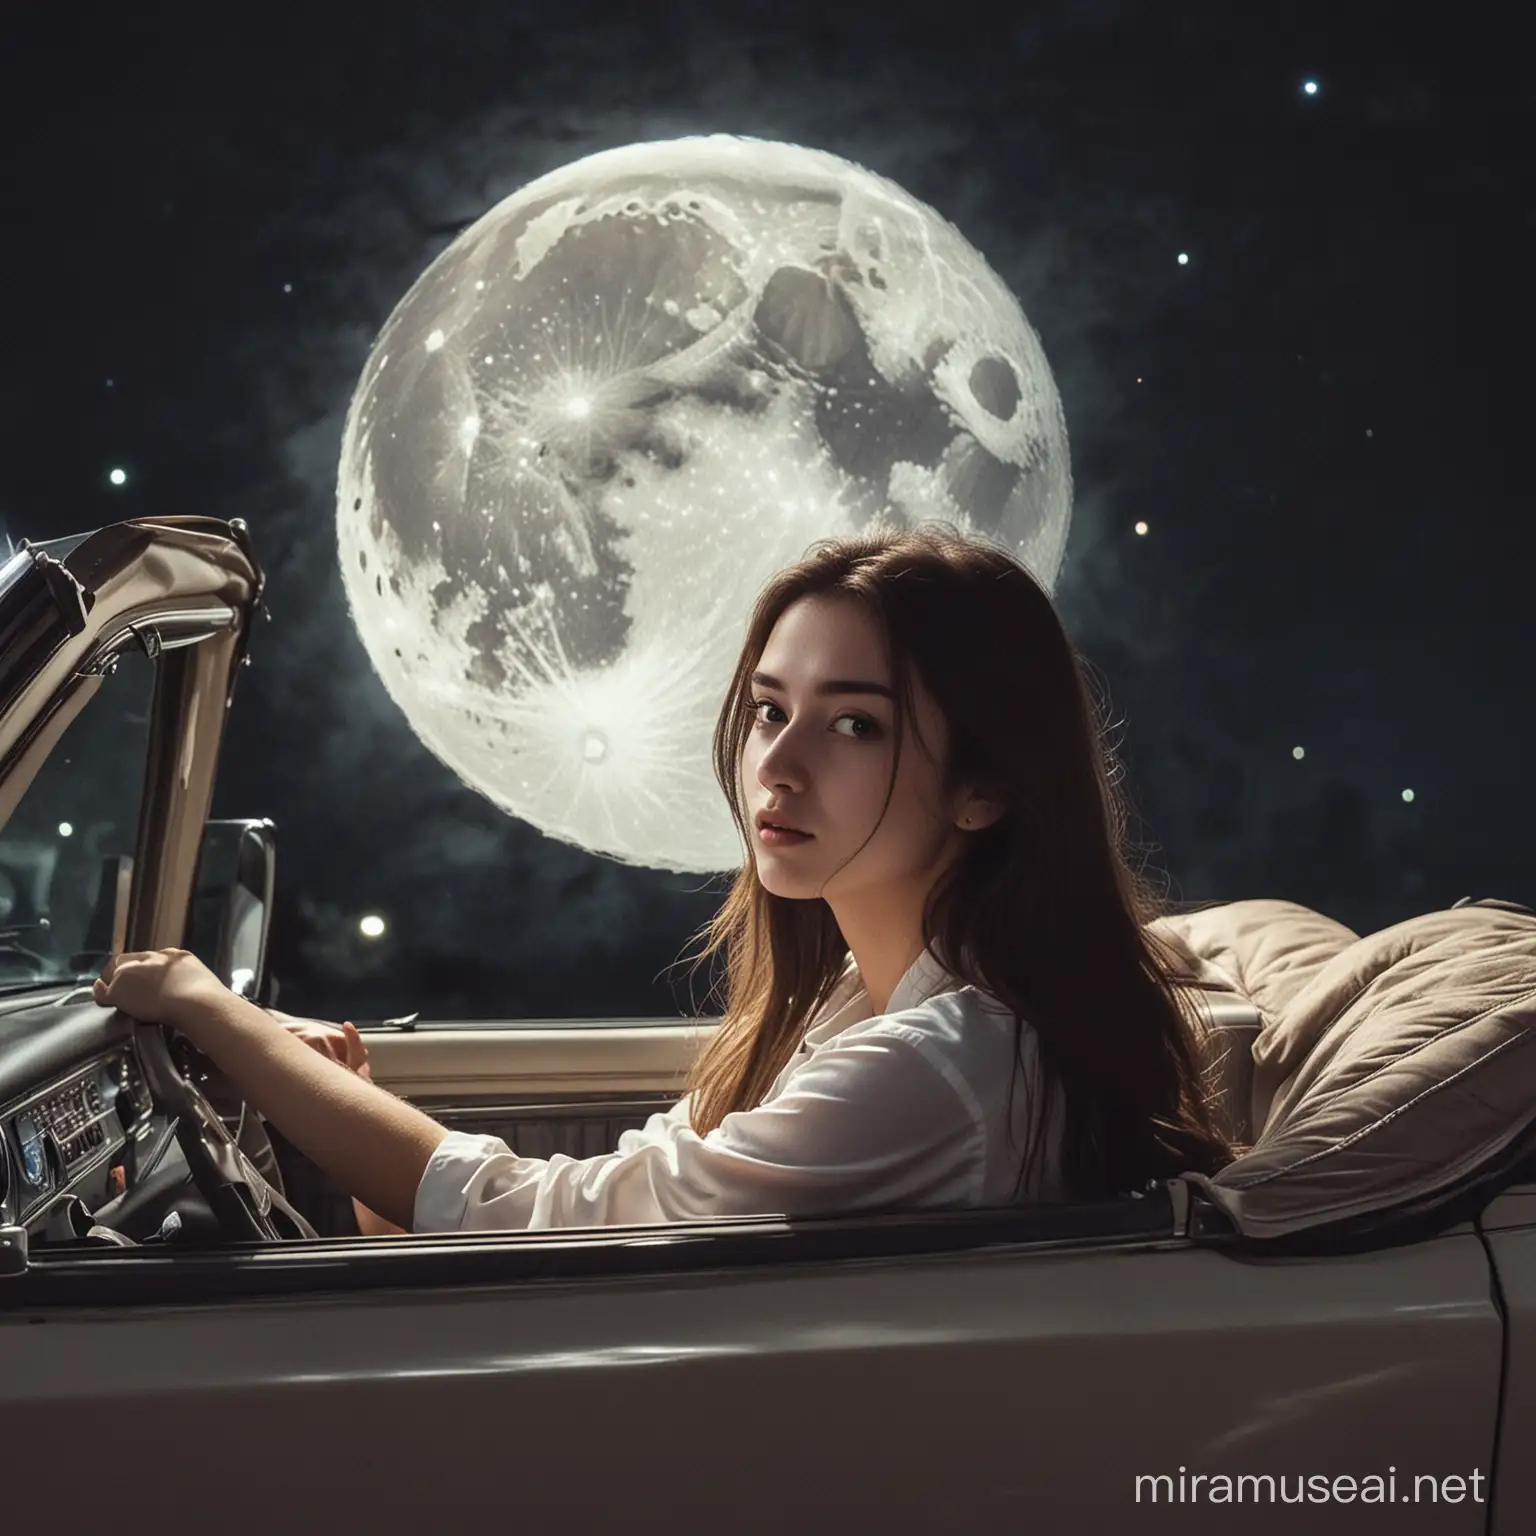 Girl Gazing at Moon from Car Window